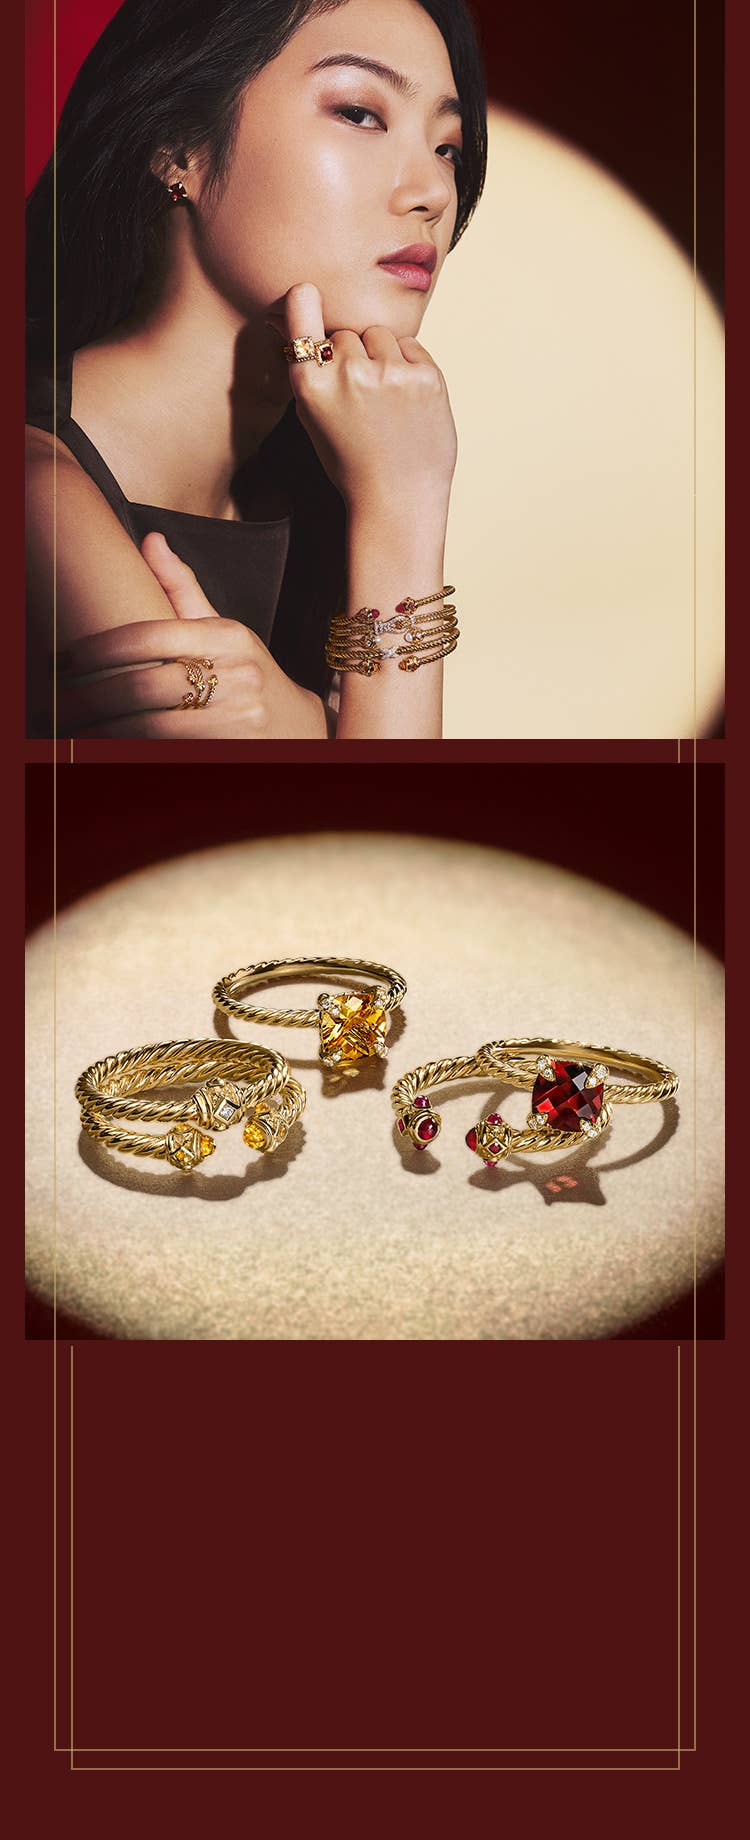 An image of a model wearing gold cable bracelets and a stack of red, yellow and gold rings.